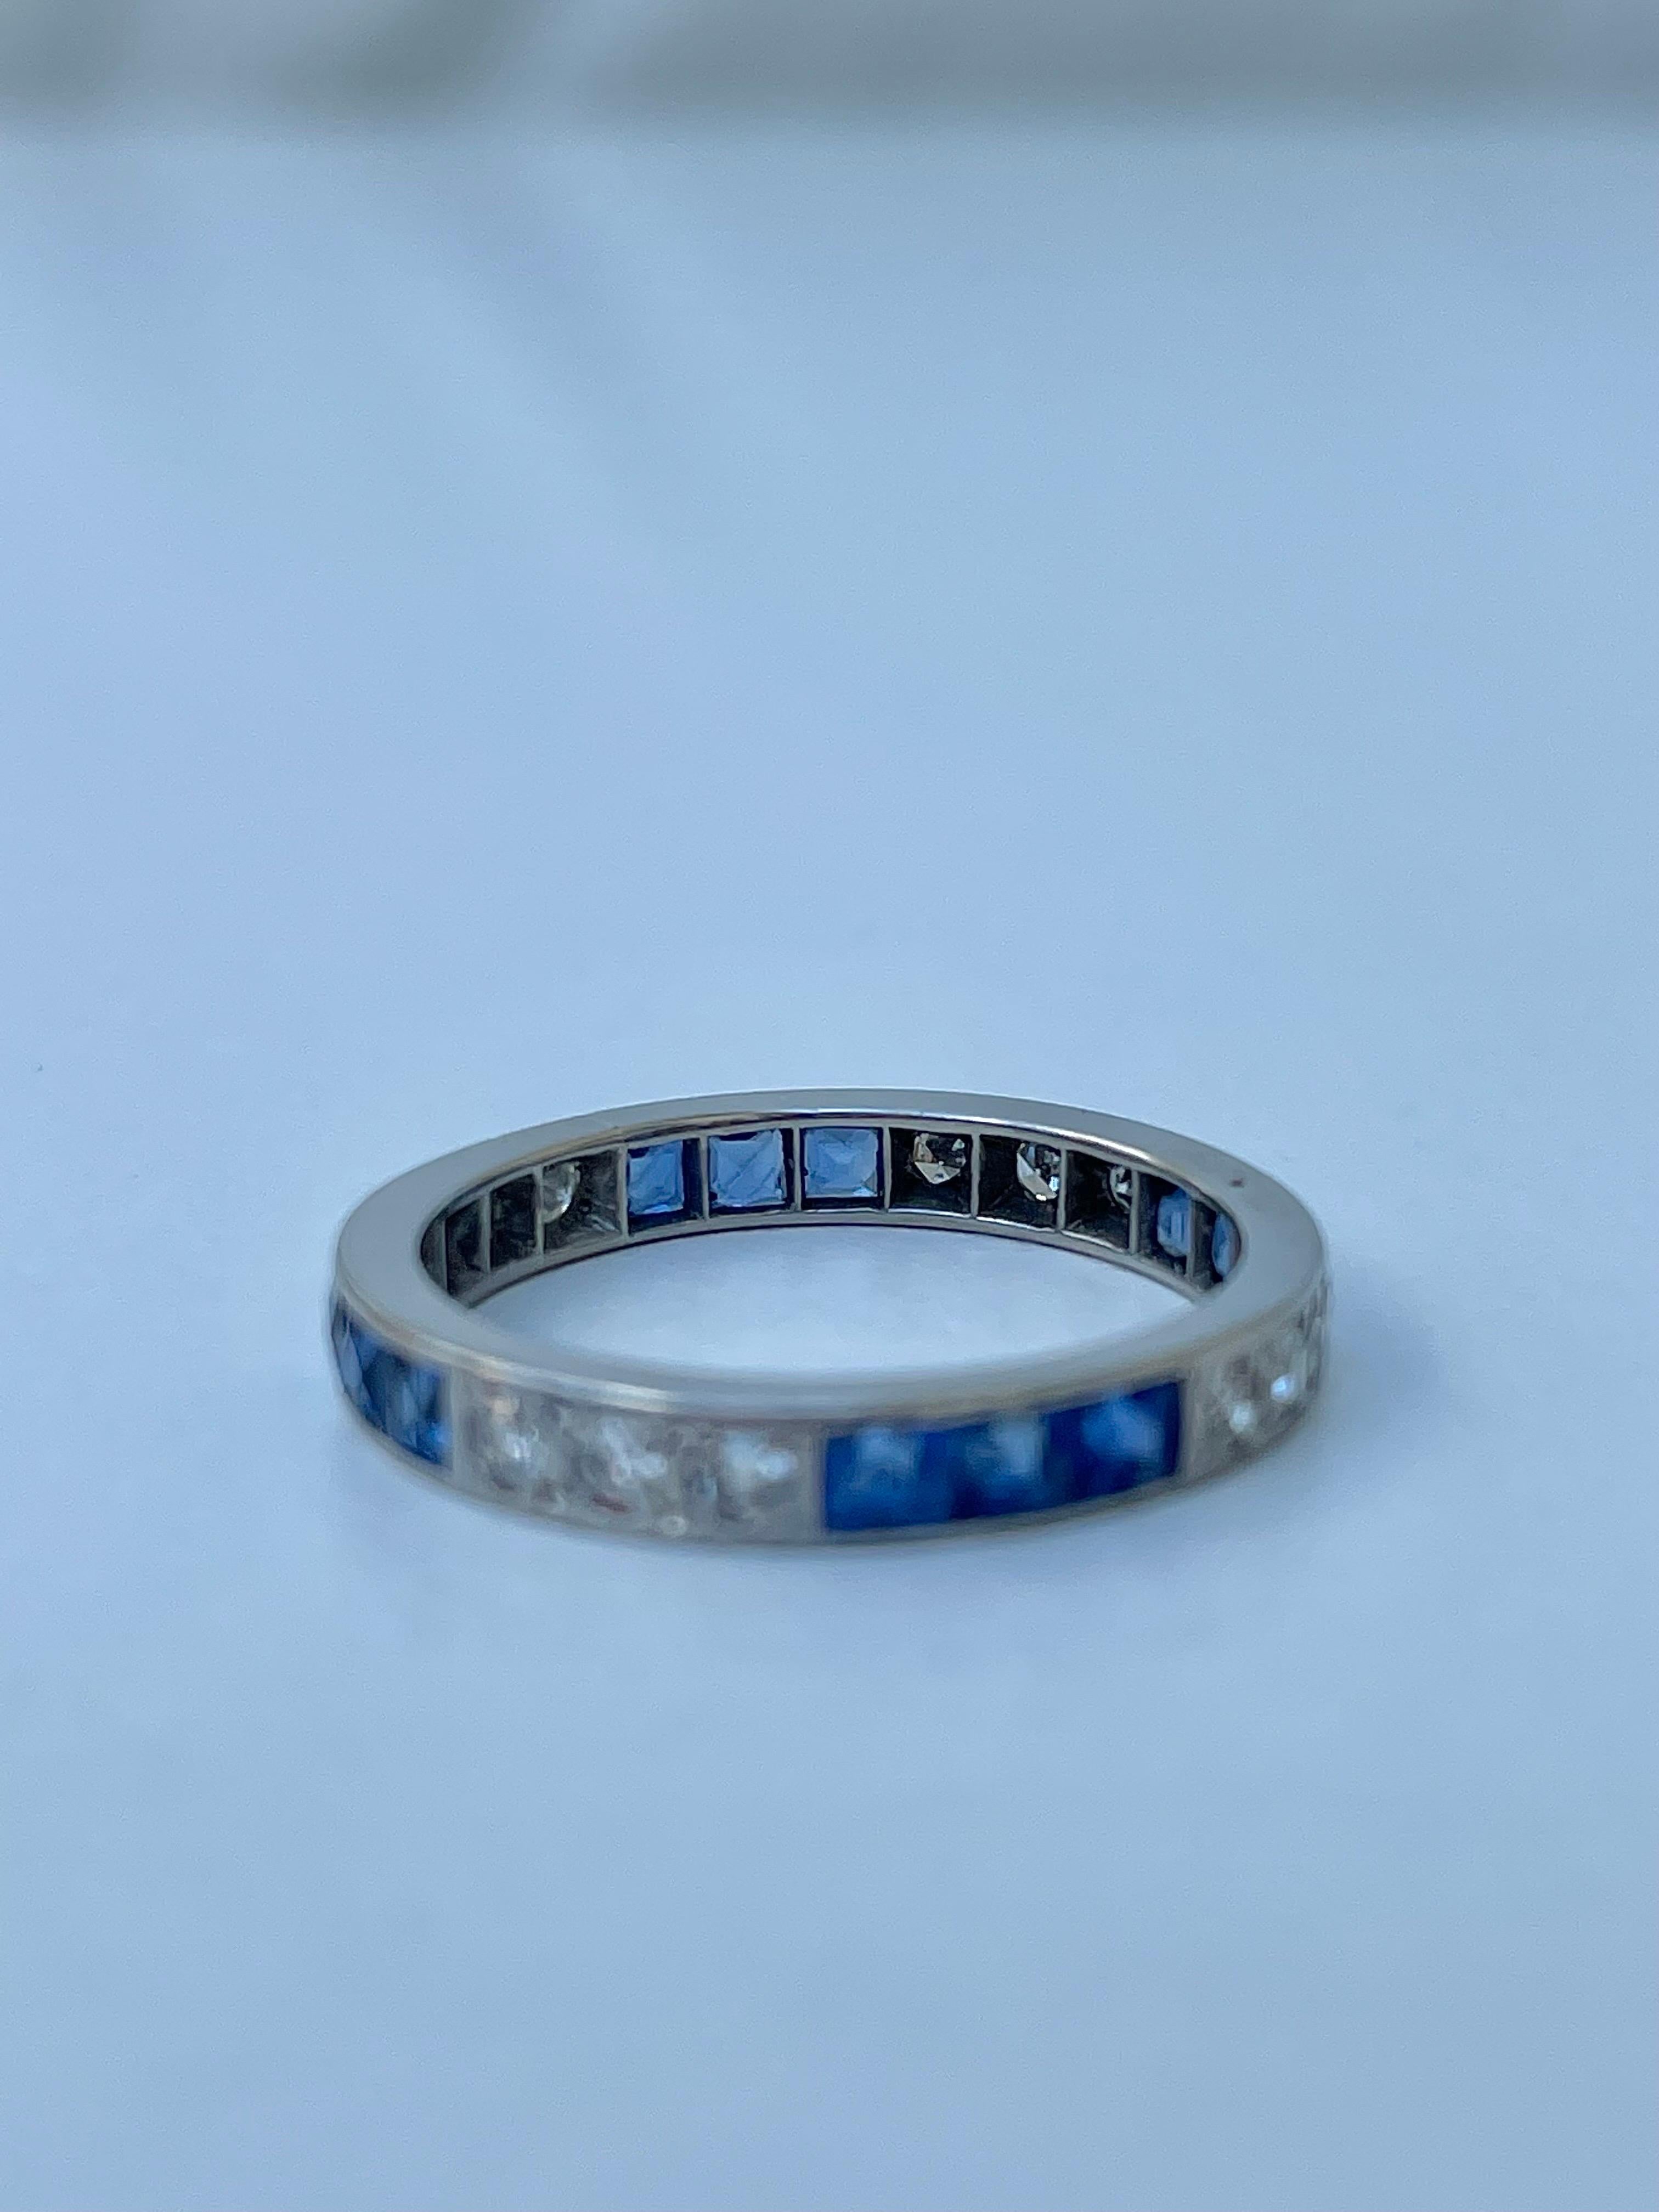 Art Deco Platinum Sapphire and Diamond Full Eternity Band Ring 

delightful sapphire and diamond stone ring, truly sparkles 

The item comes without the box in the photos but will be presented in a gift box

Measurements: weight 2.63g, size UK M1/2,